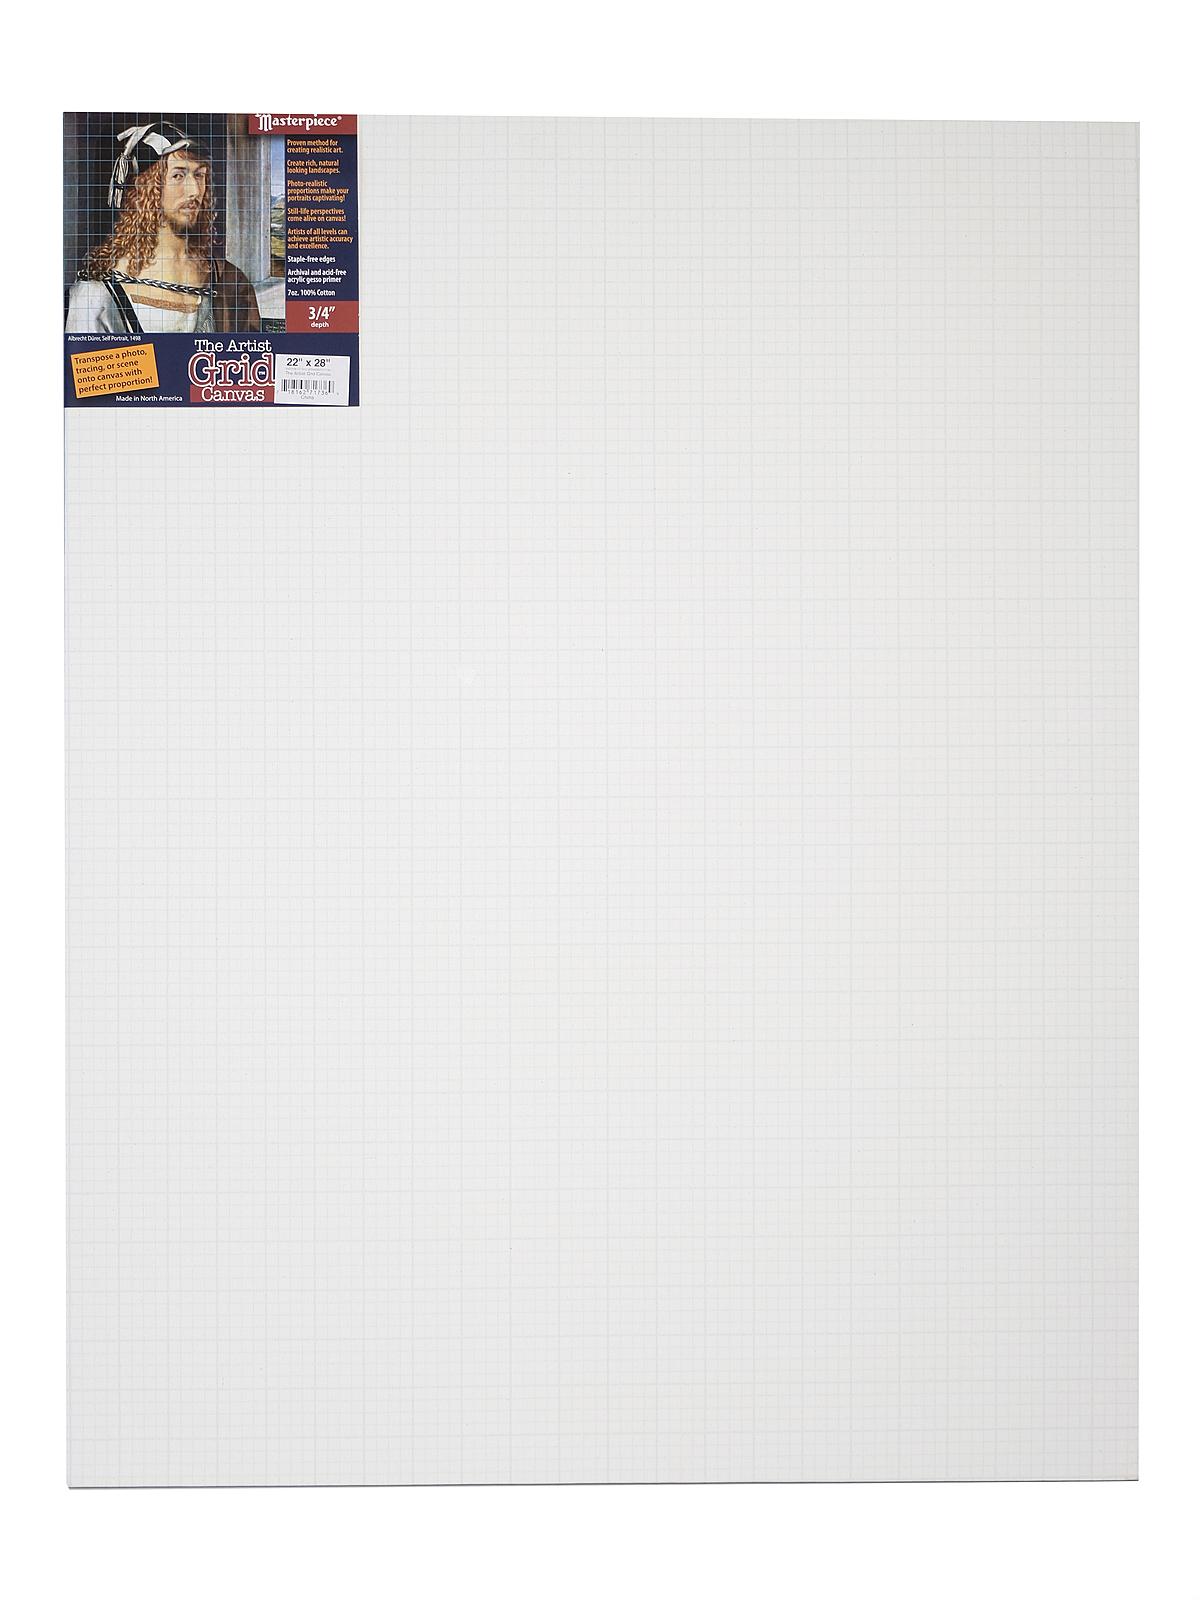 The Artist Grid Canvas 22 In. X 28 In.